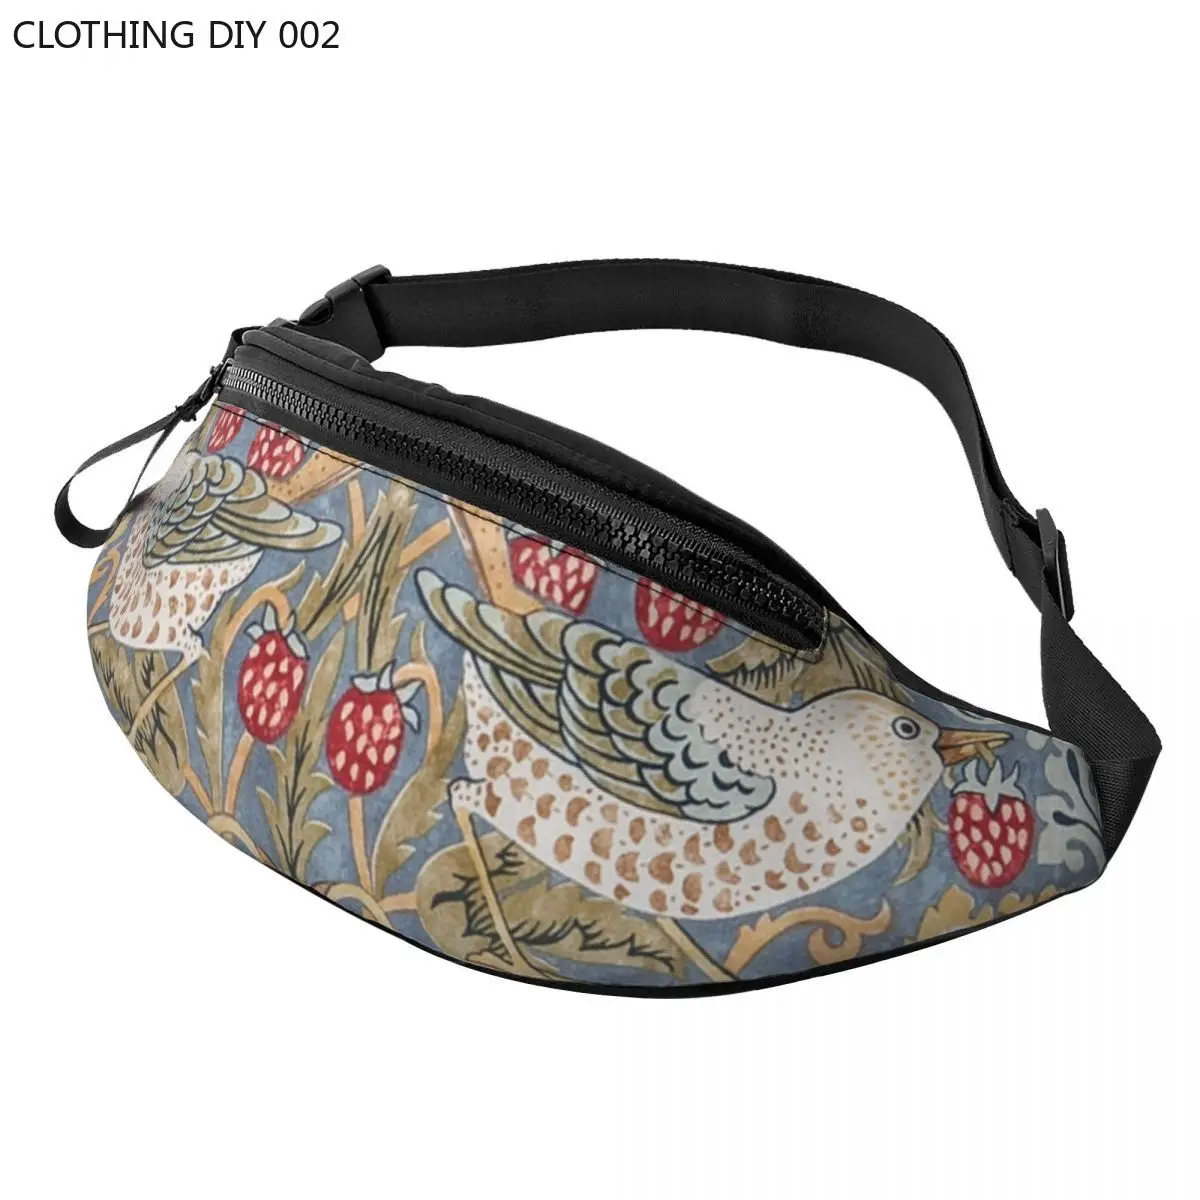 

Strawberry Thief Fanny Pack for Running Men Women William Morris Floral Textile Pattern Crossbody Waist Bag Phone Money Pouch